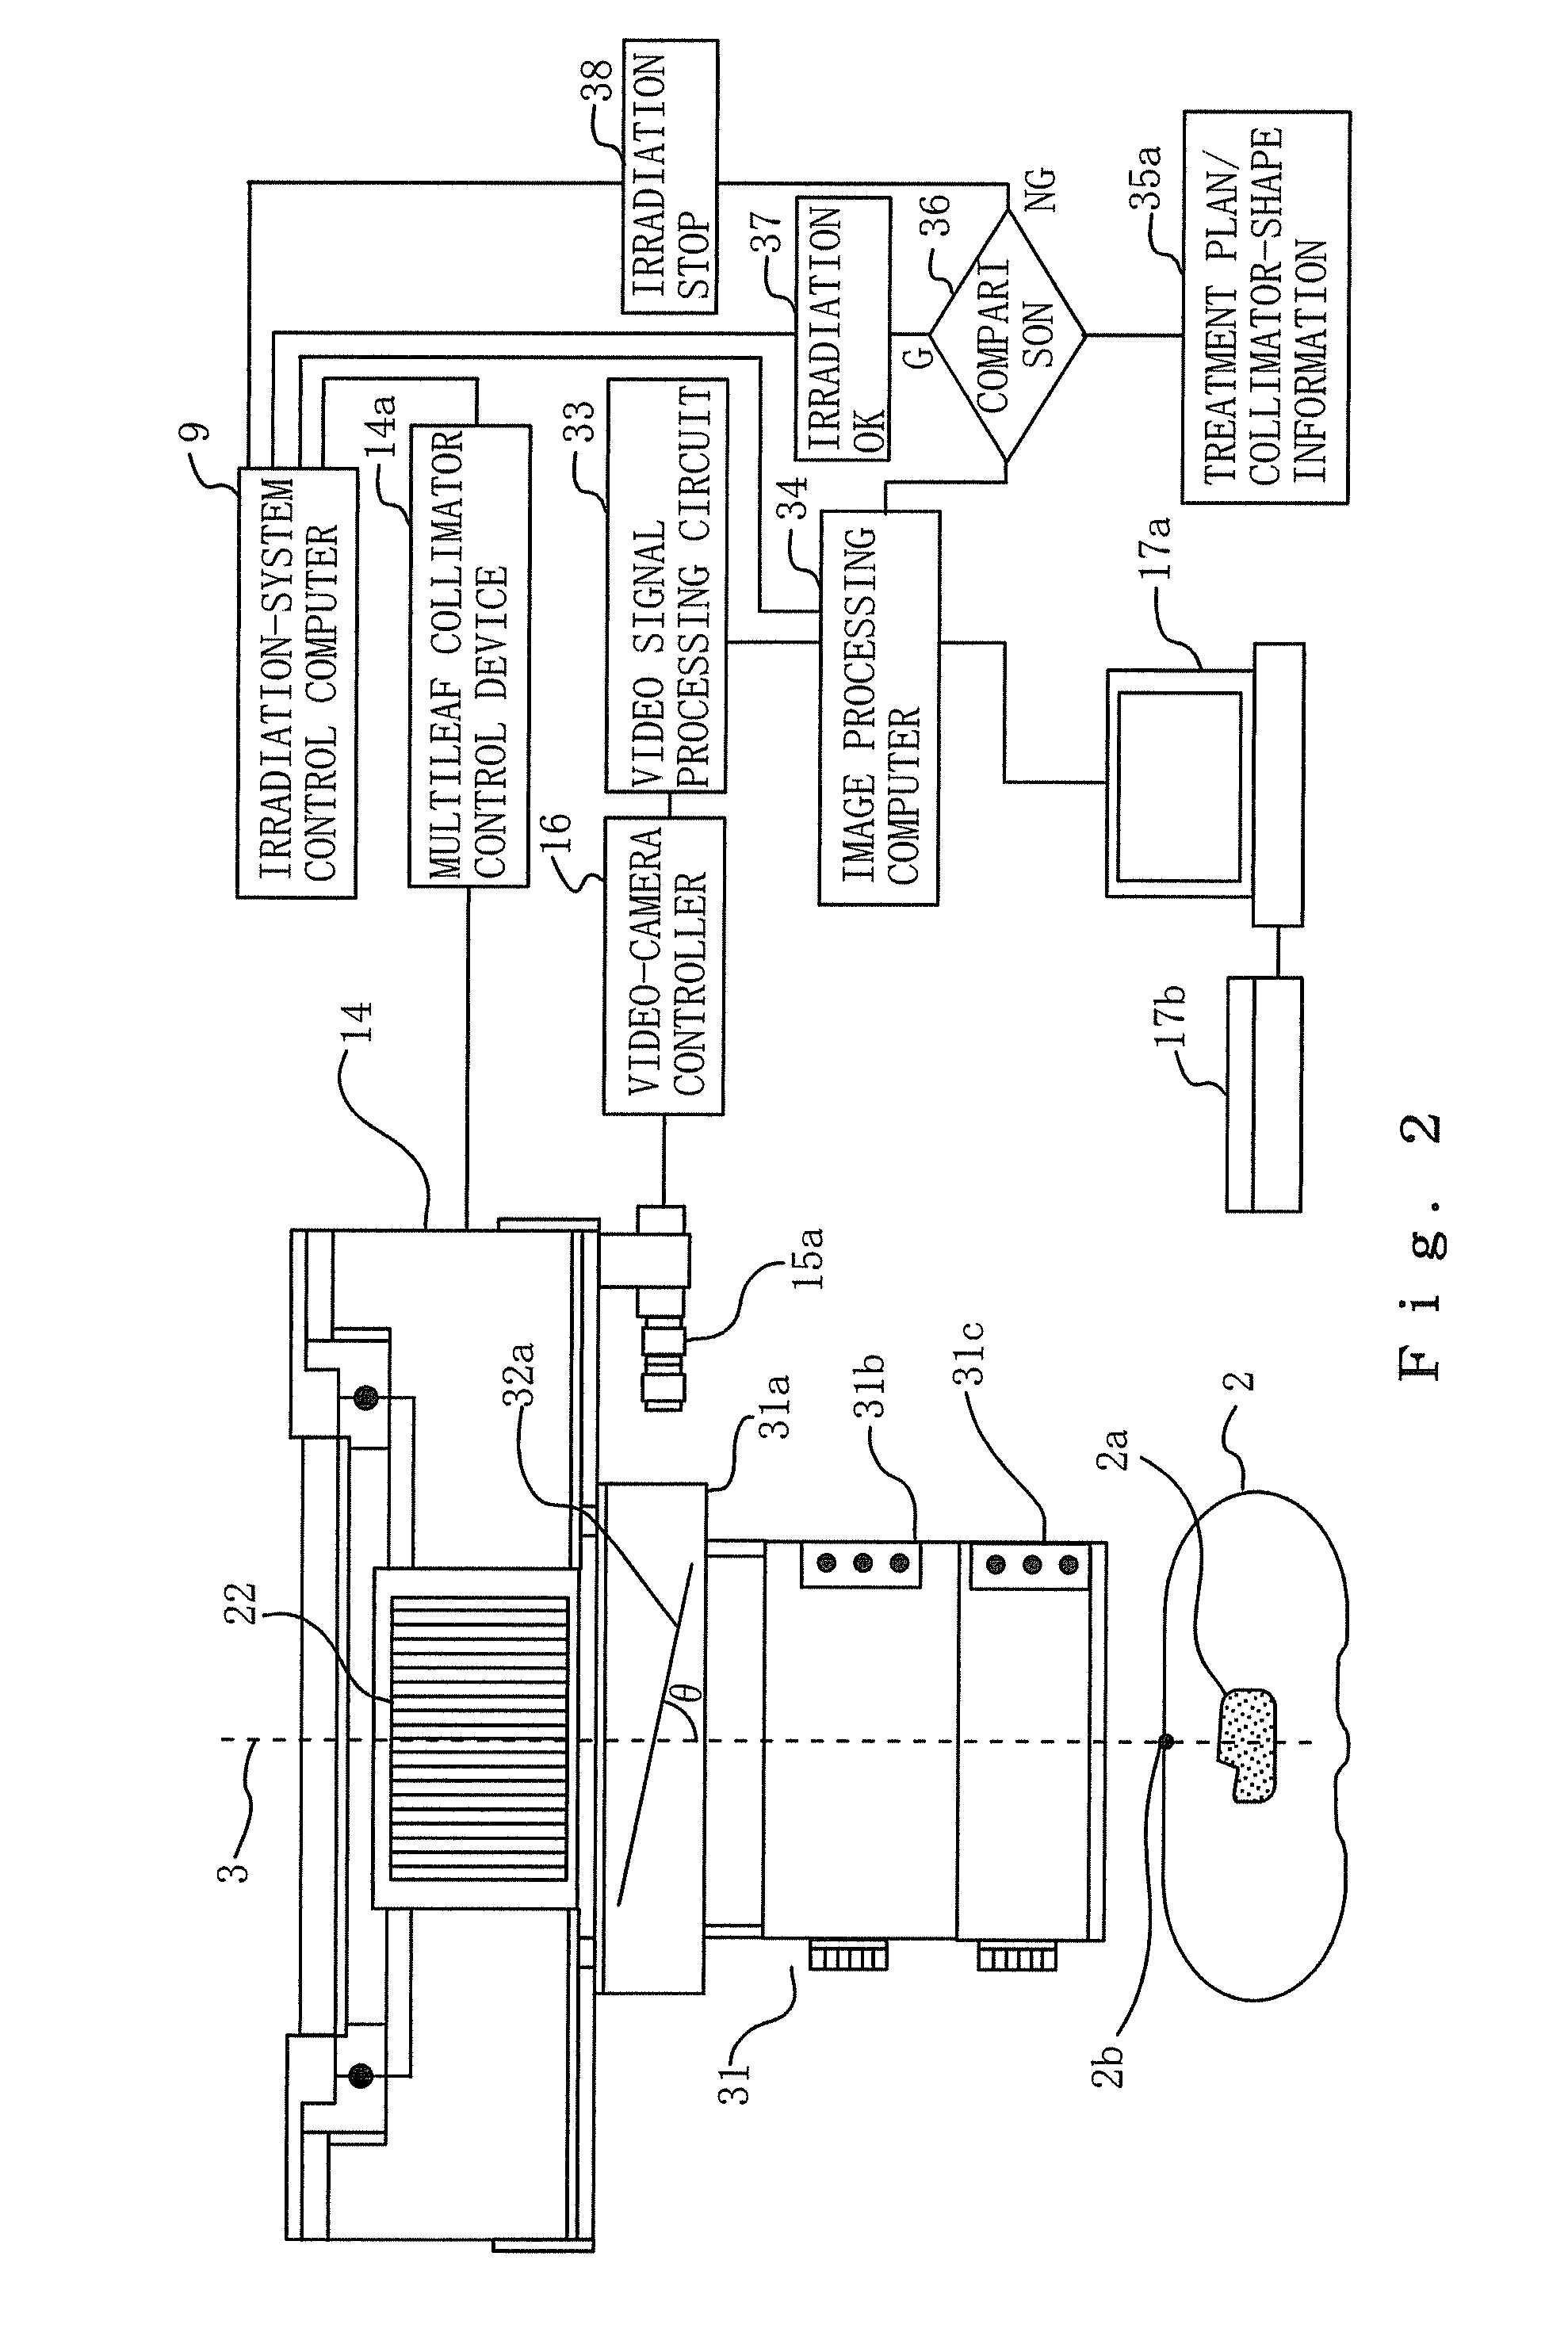 Particle-Beam Treatment System